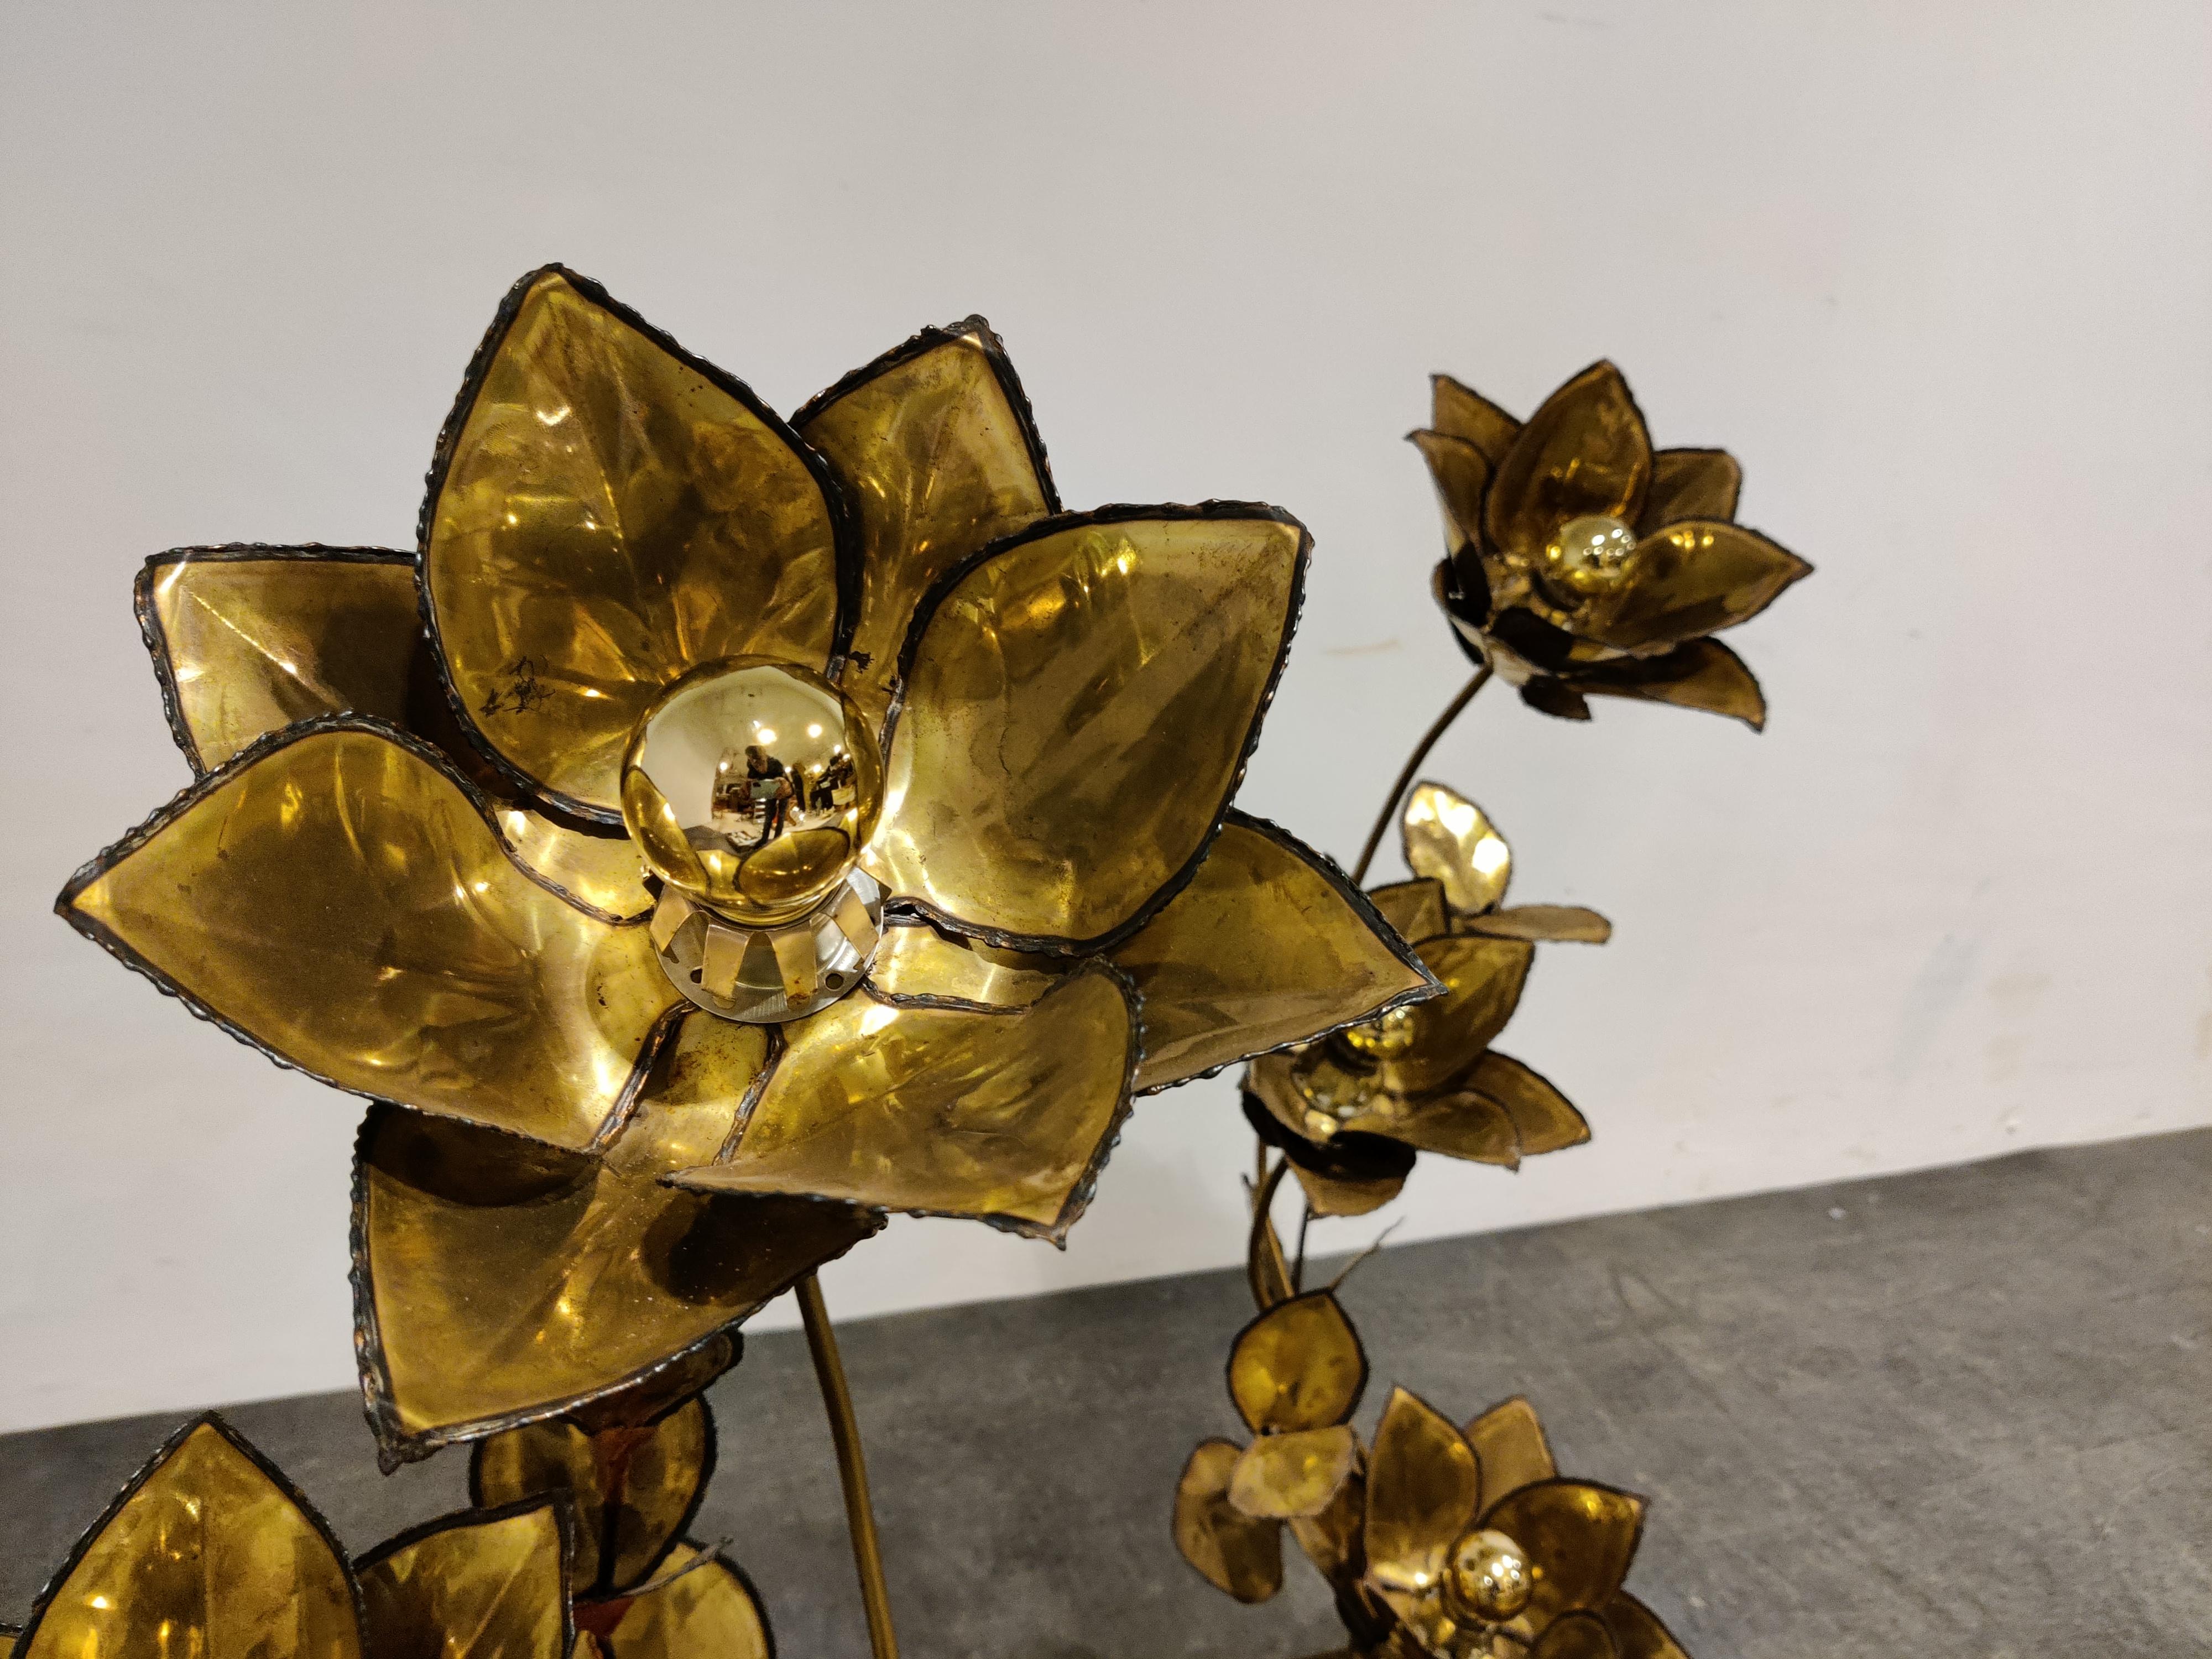 Beautiful torch cut brass floor or table lamp by Maison jansen with glass globes.

This flower lamp has three lightpoints and emits a beautiful warm light.

Good original condition with patina, tested and ready to use.

The lamp has a brown